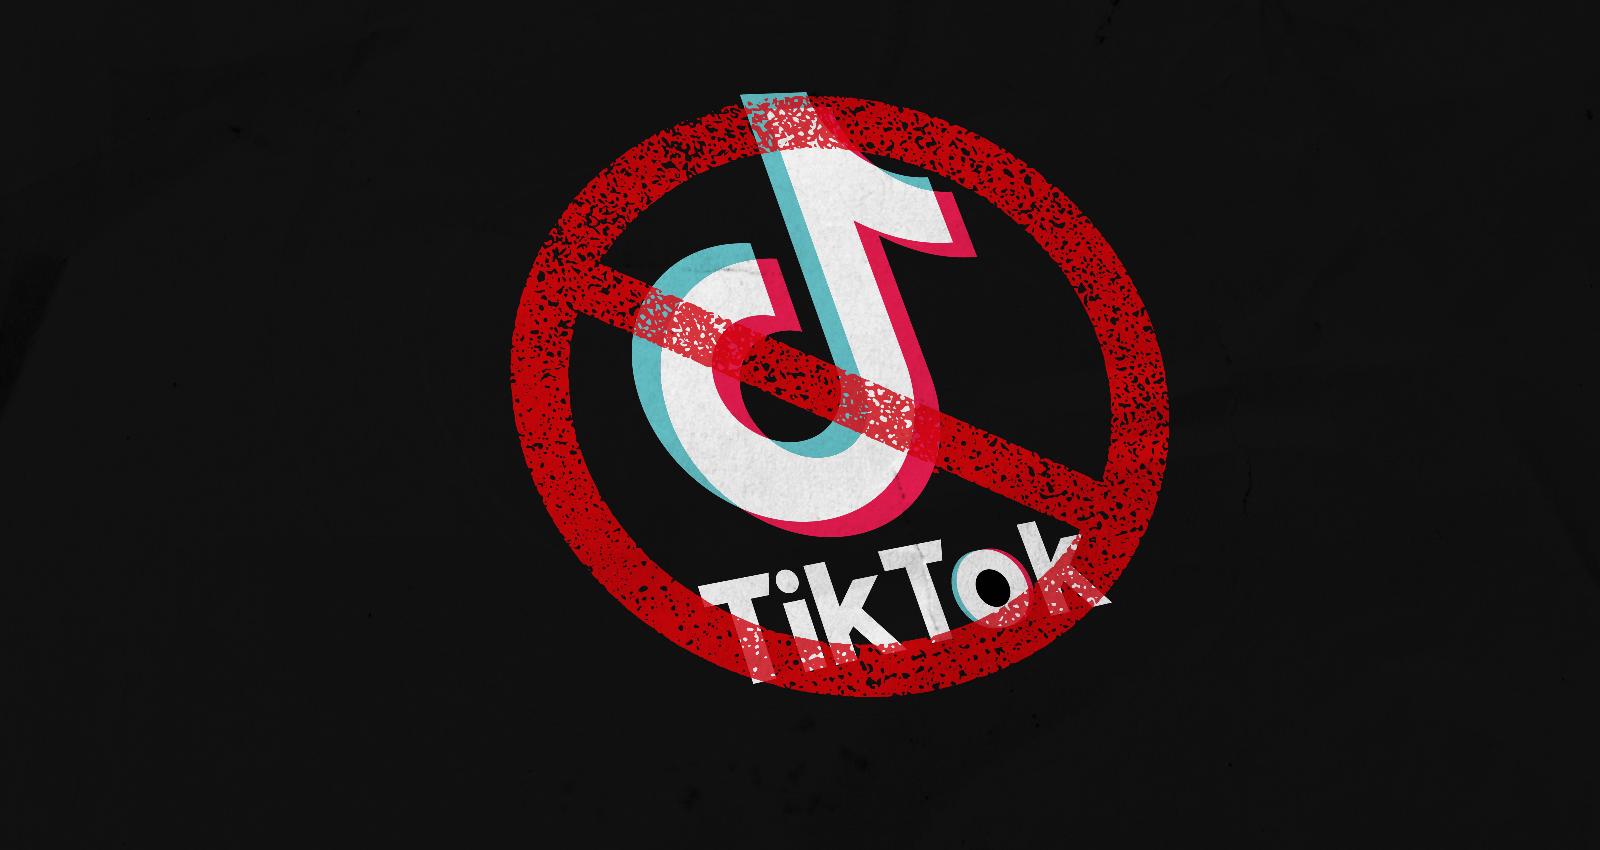 U.S. House passes revised bill to ban TikTok or force sale